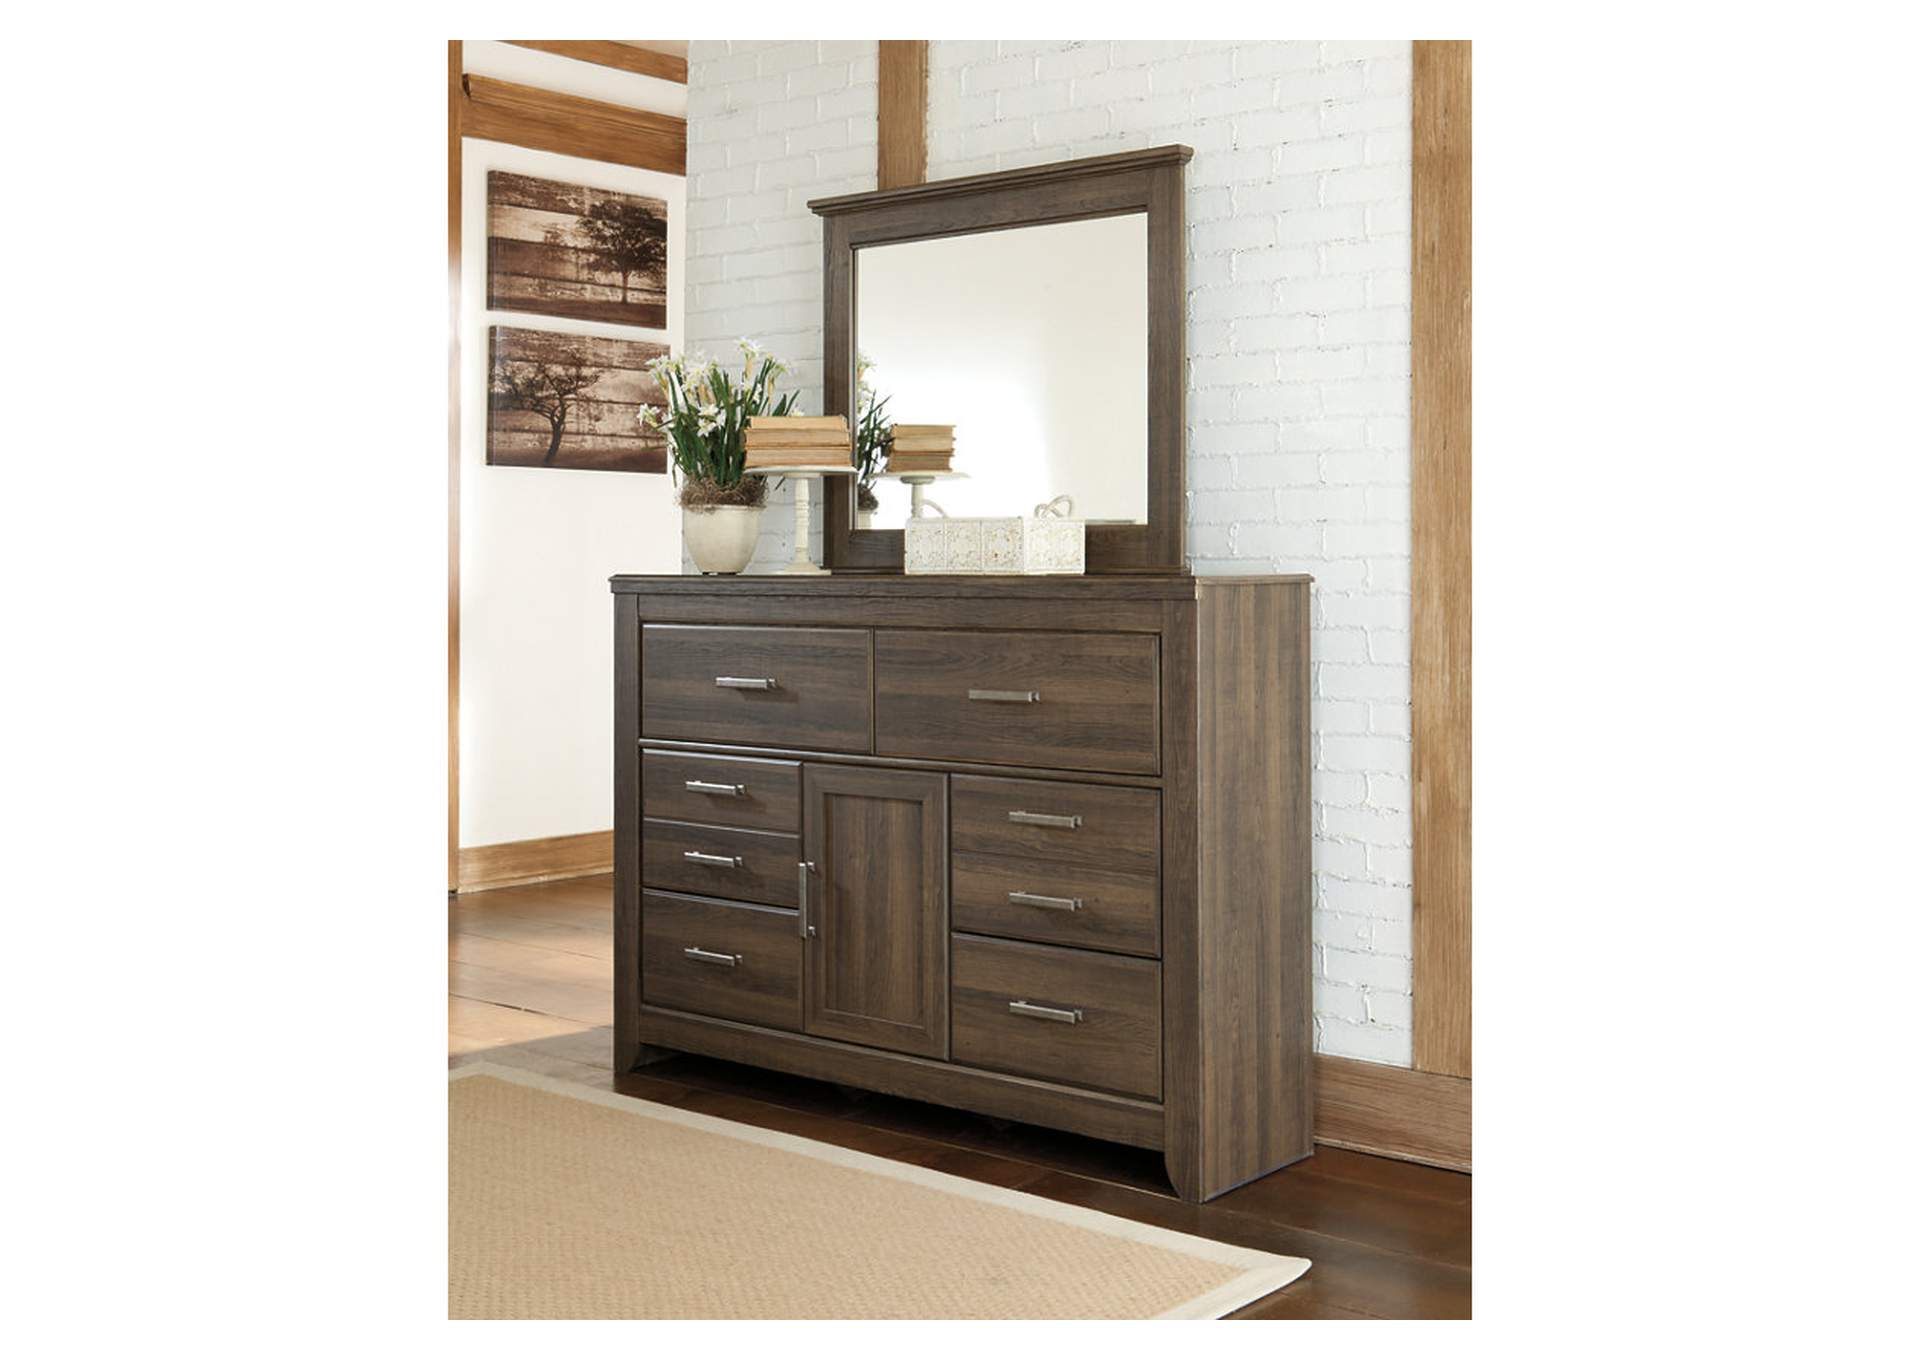 Juararo Queen Poster Bed with Mirrored Dresser,Signature Design By Ashley